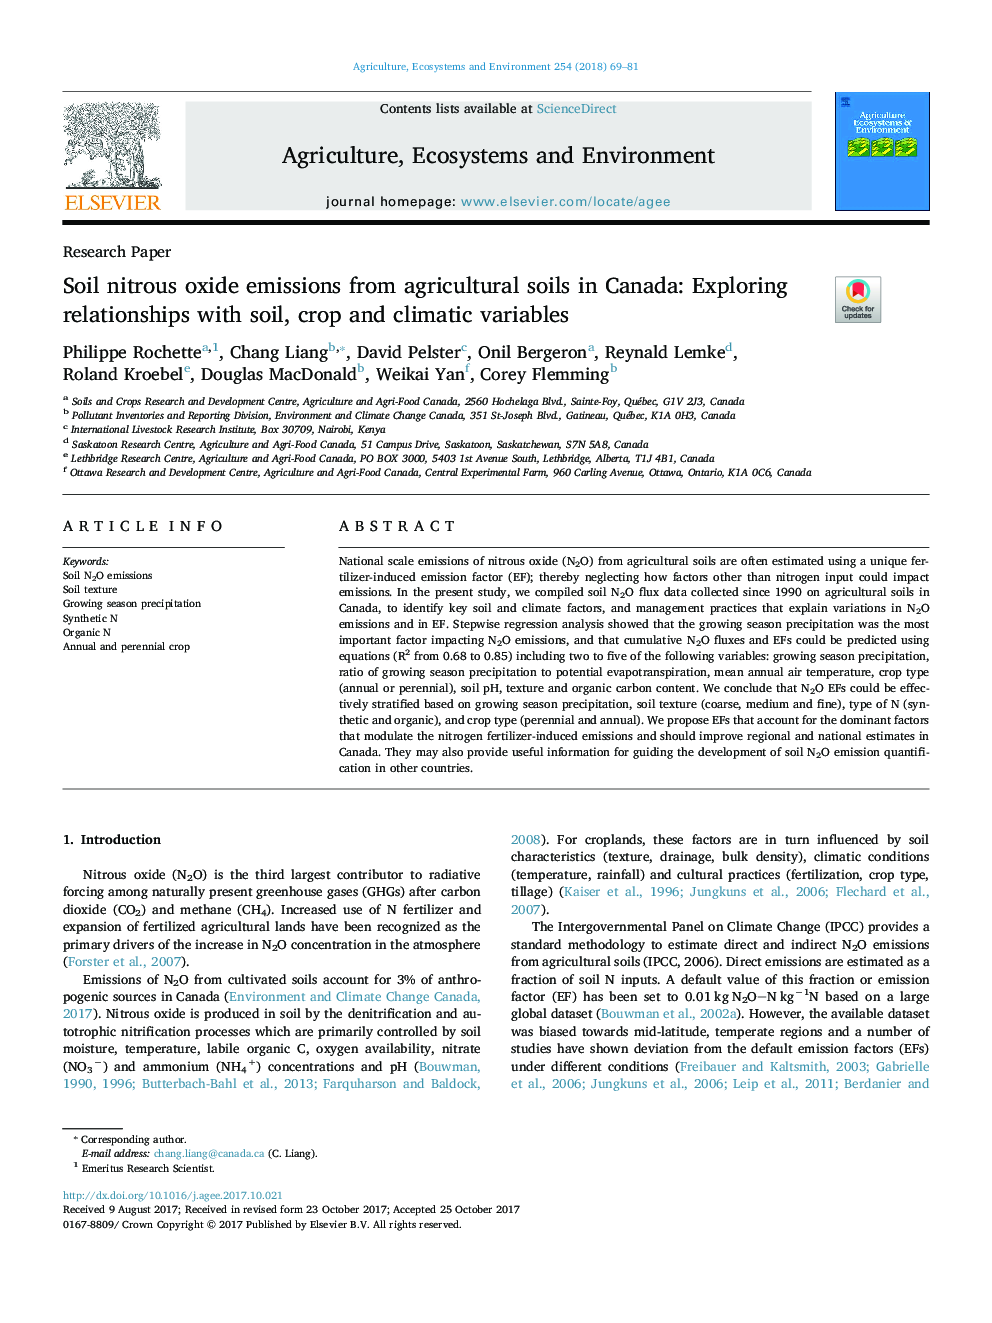 Soil nitrous oxide emissions from agricultural soils in Canada: Exploring relationships with soil, crop and climatic variables